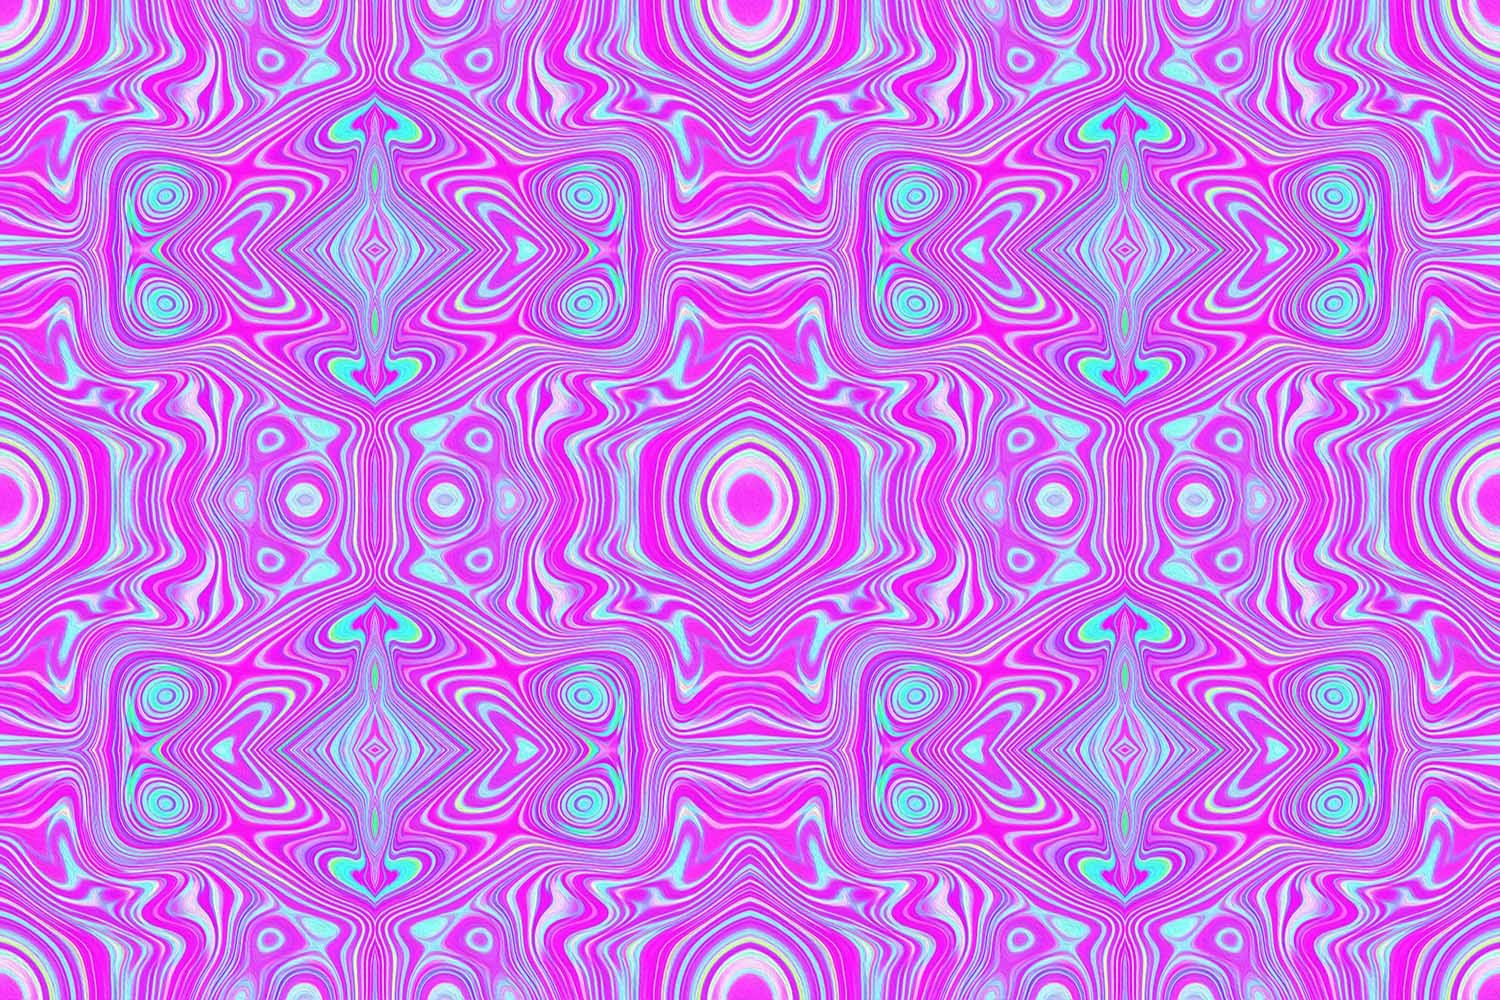 Trippy Hot Pink and Aqua Blue Abstract Pattern